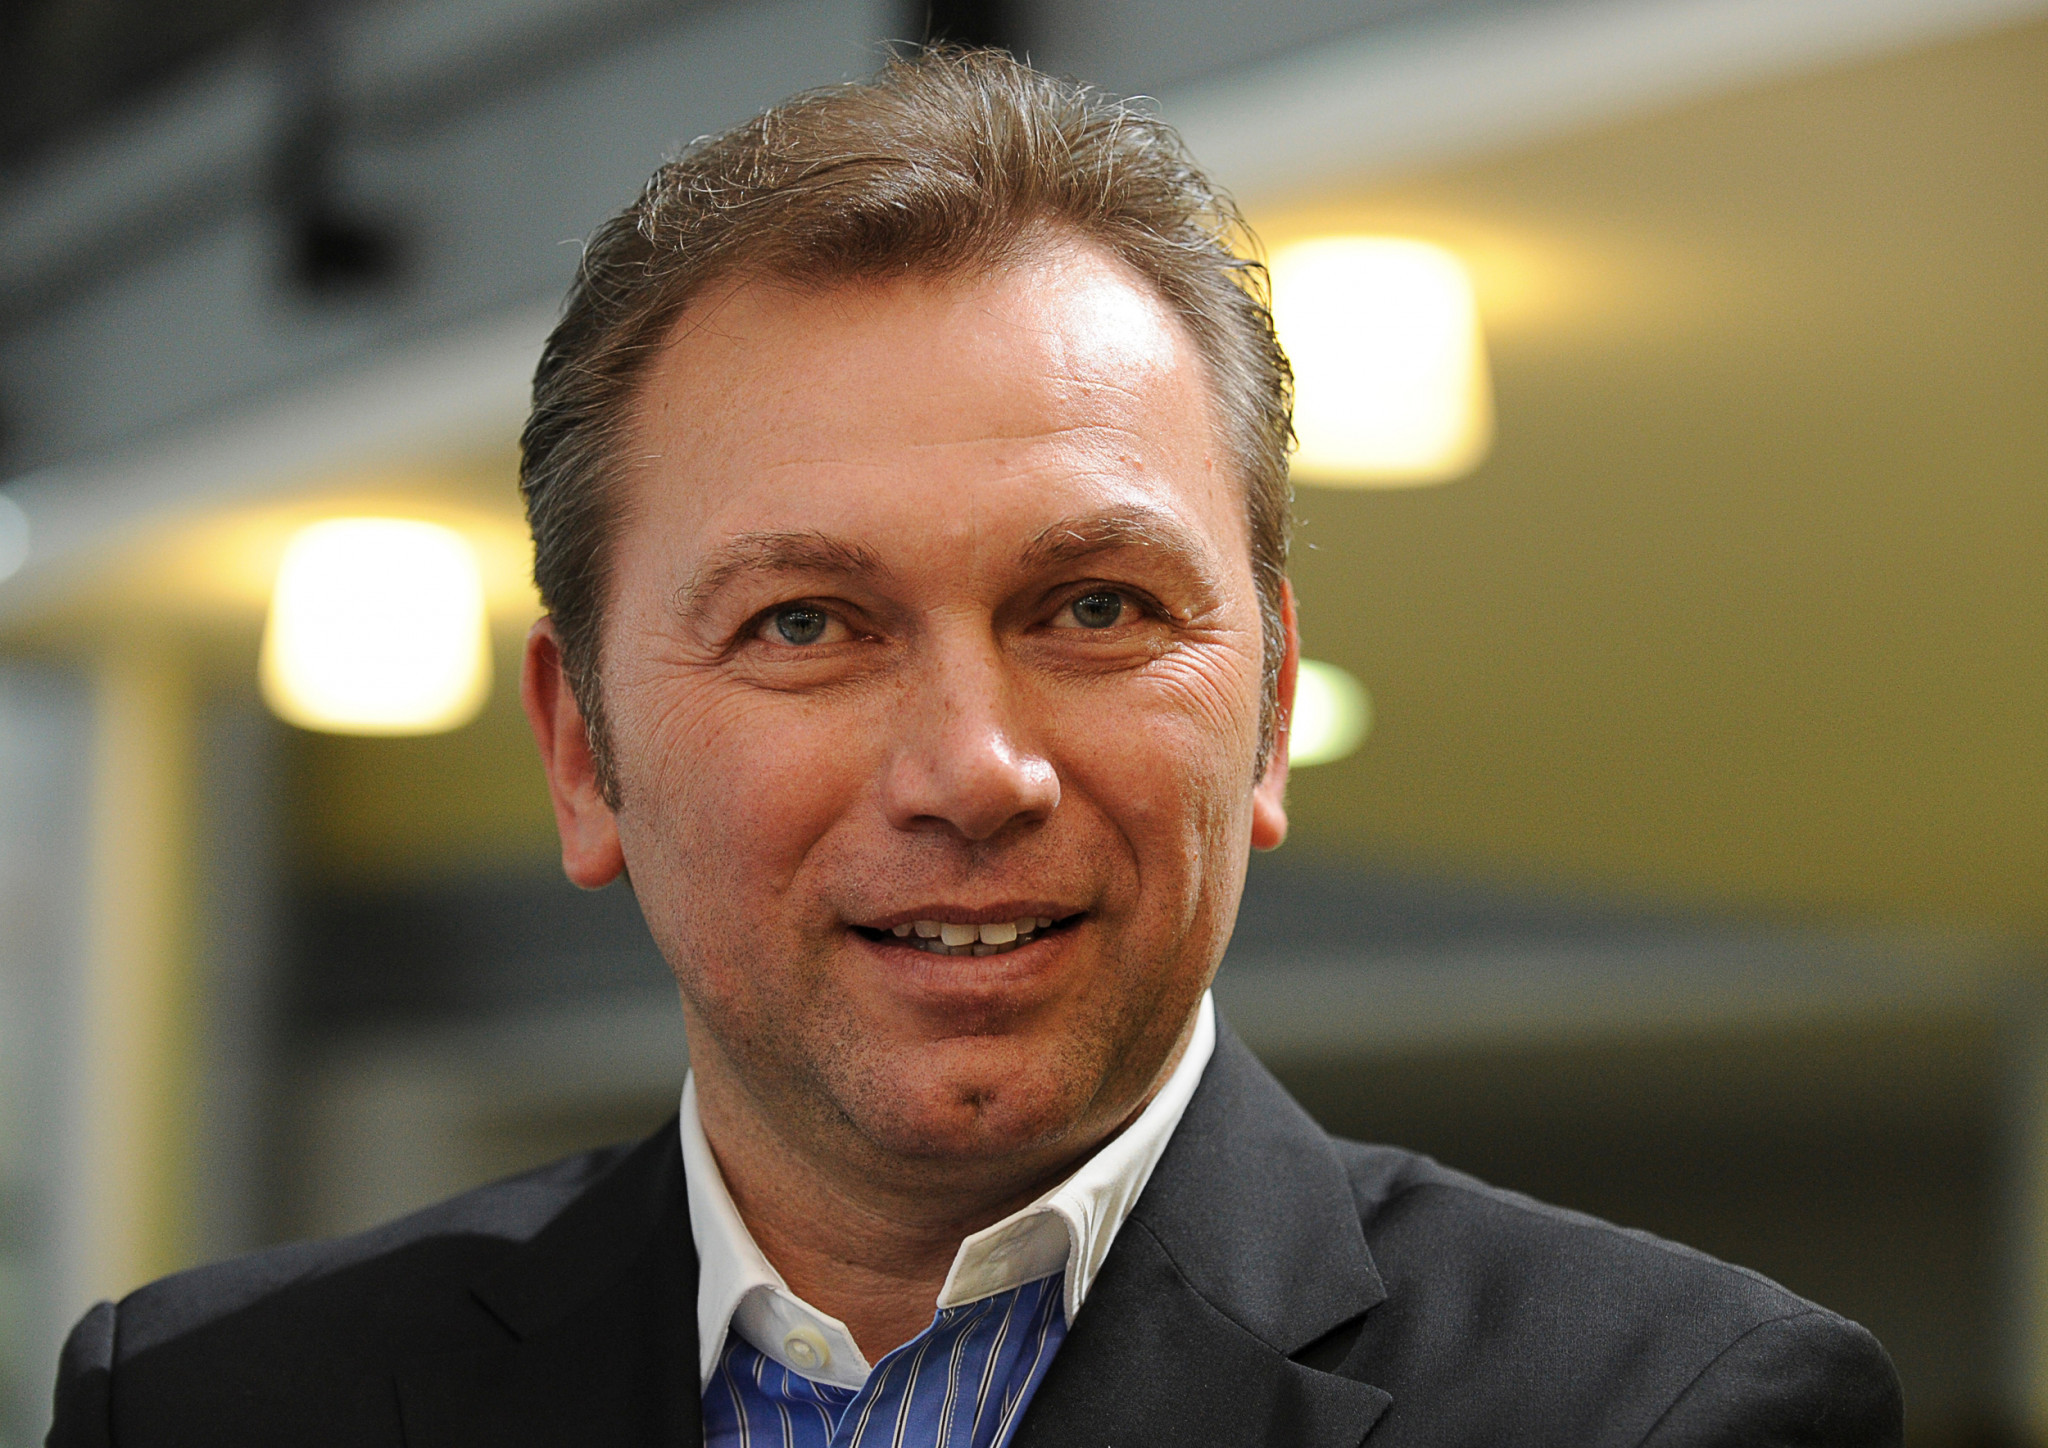 Armstrong's former manager Bruyneel told to repay $1.2 million as civil case concludes